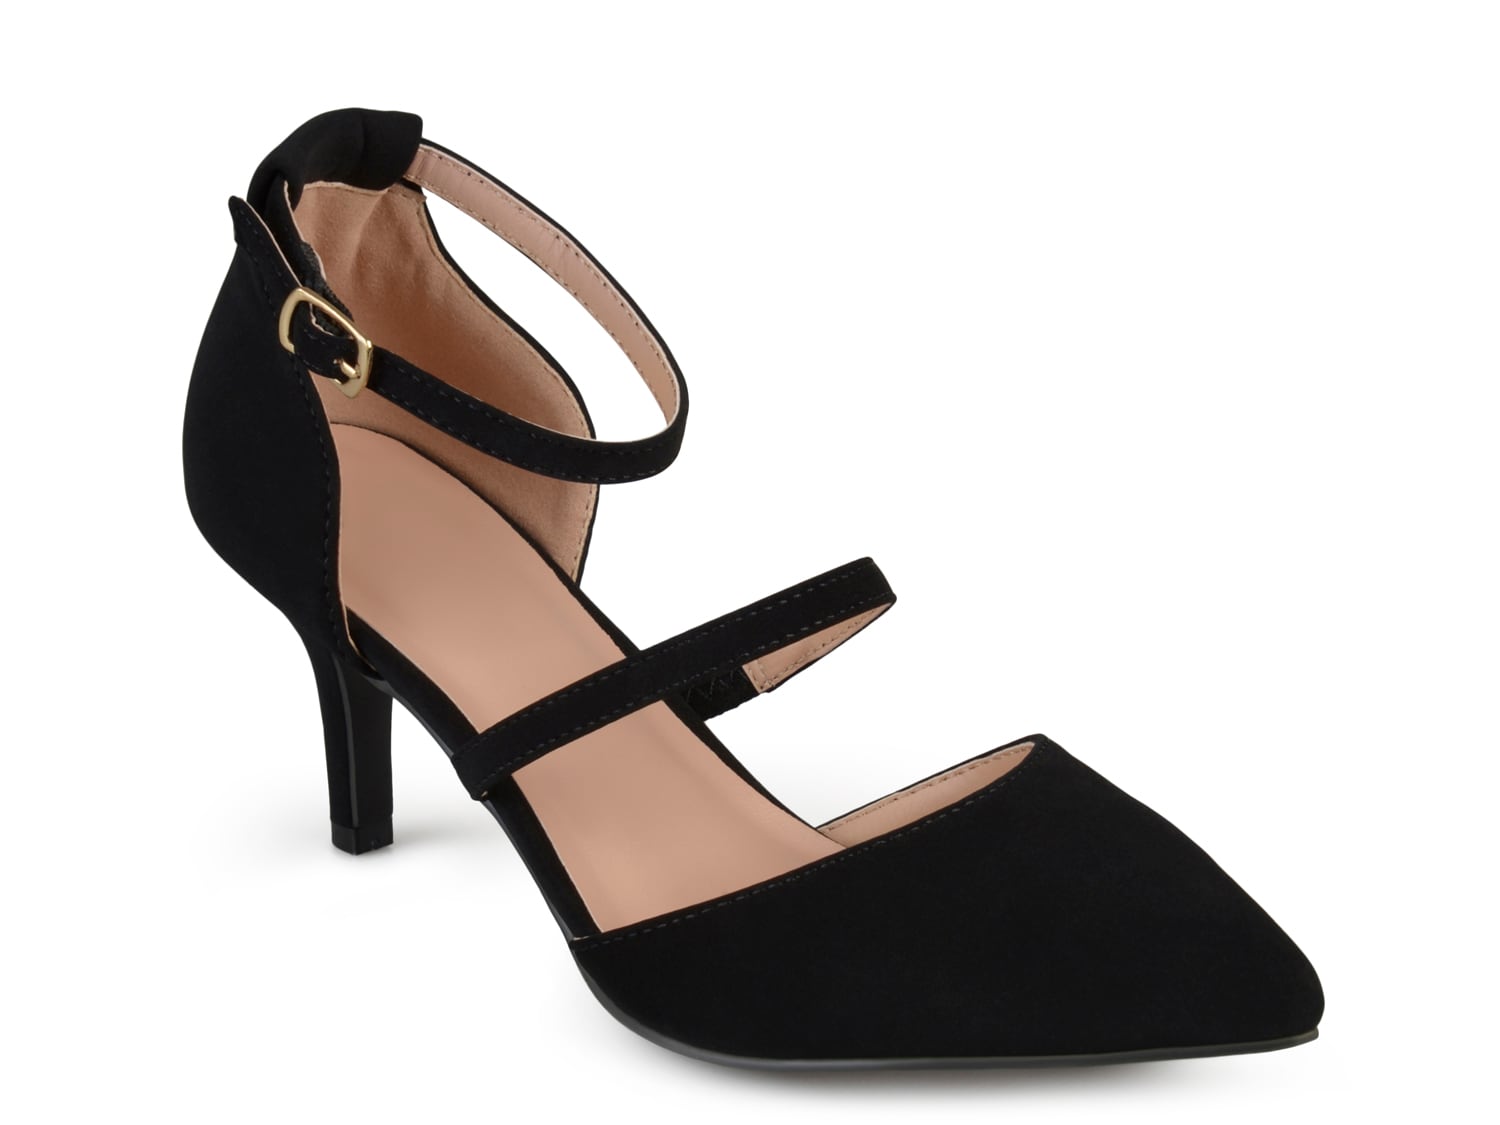 Journee Collection Chaney Pump - Free Shipping | DSW